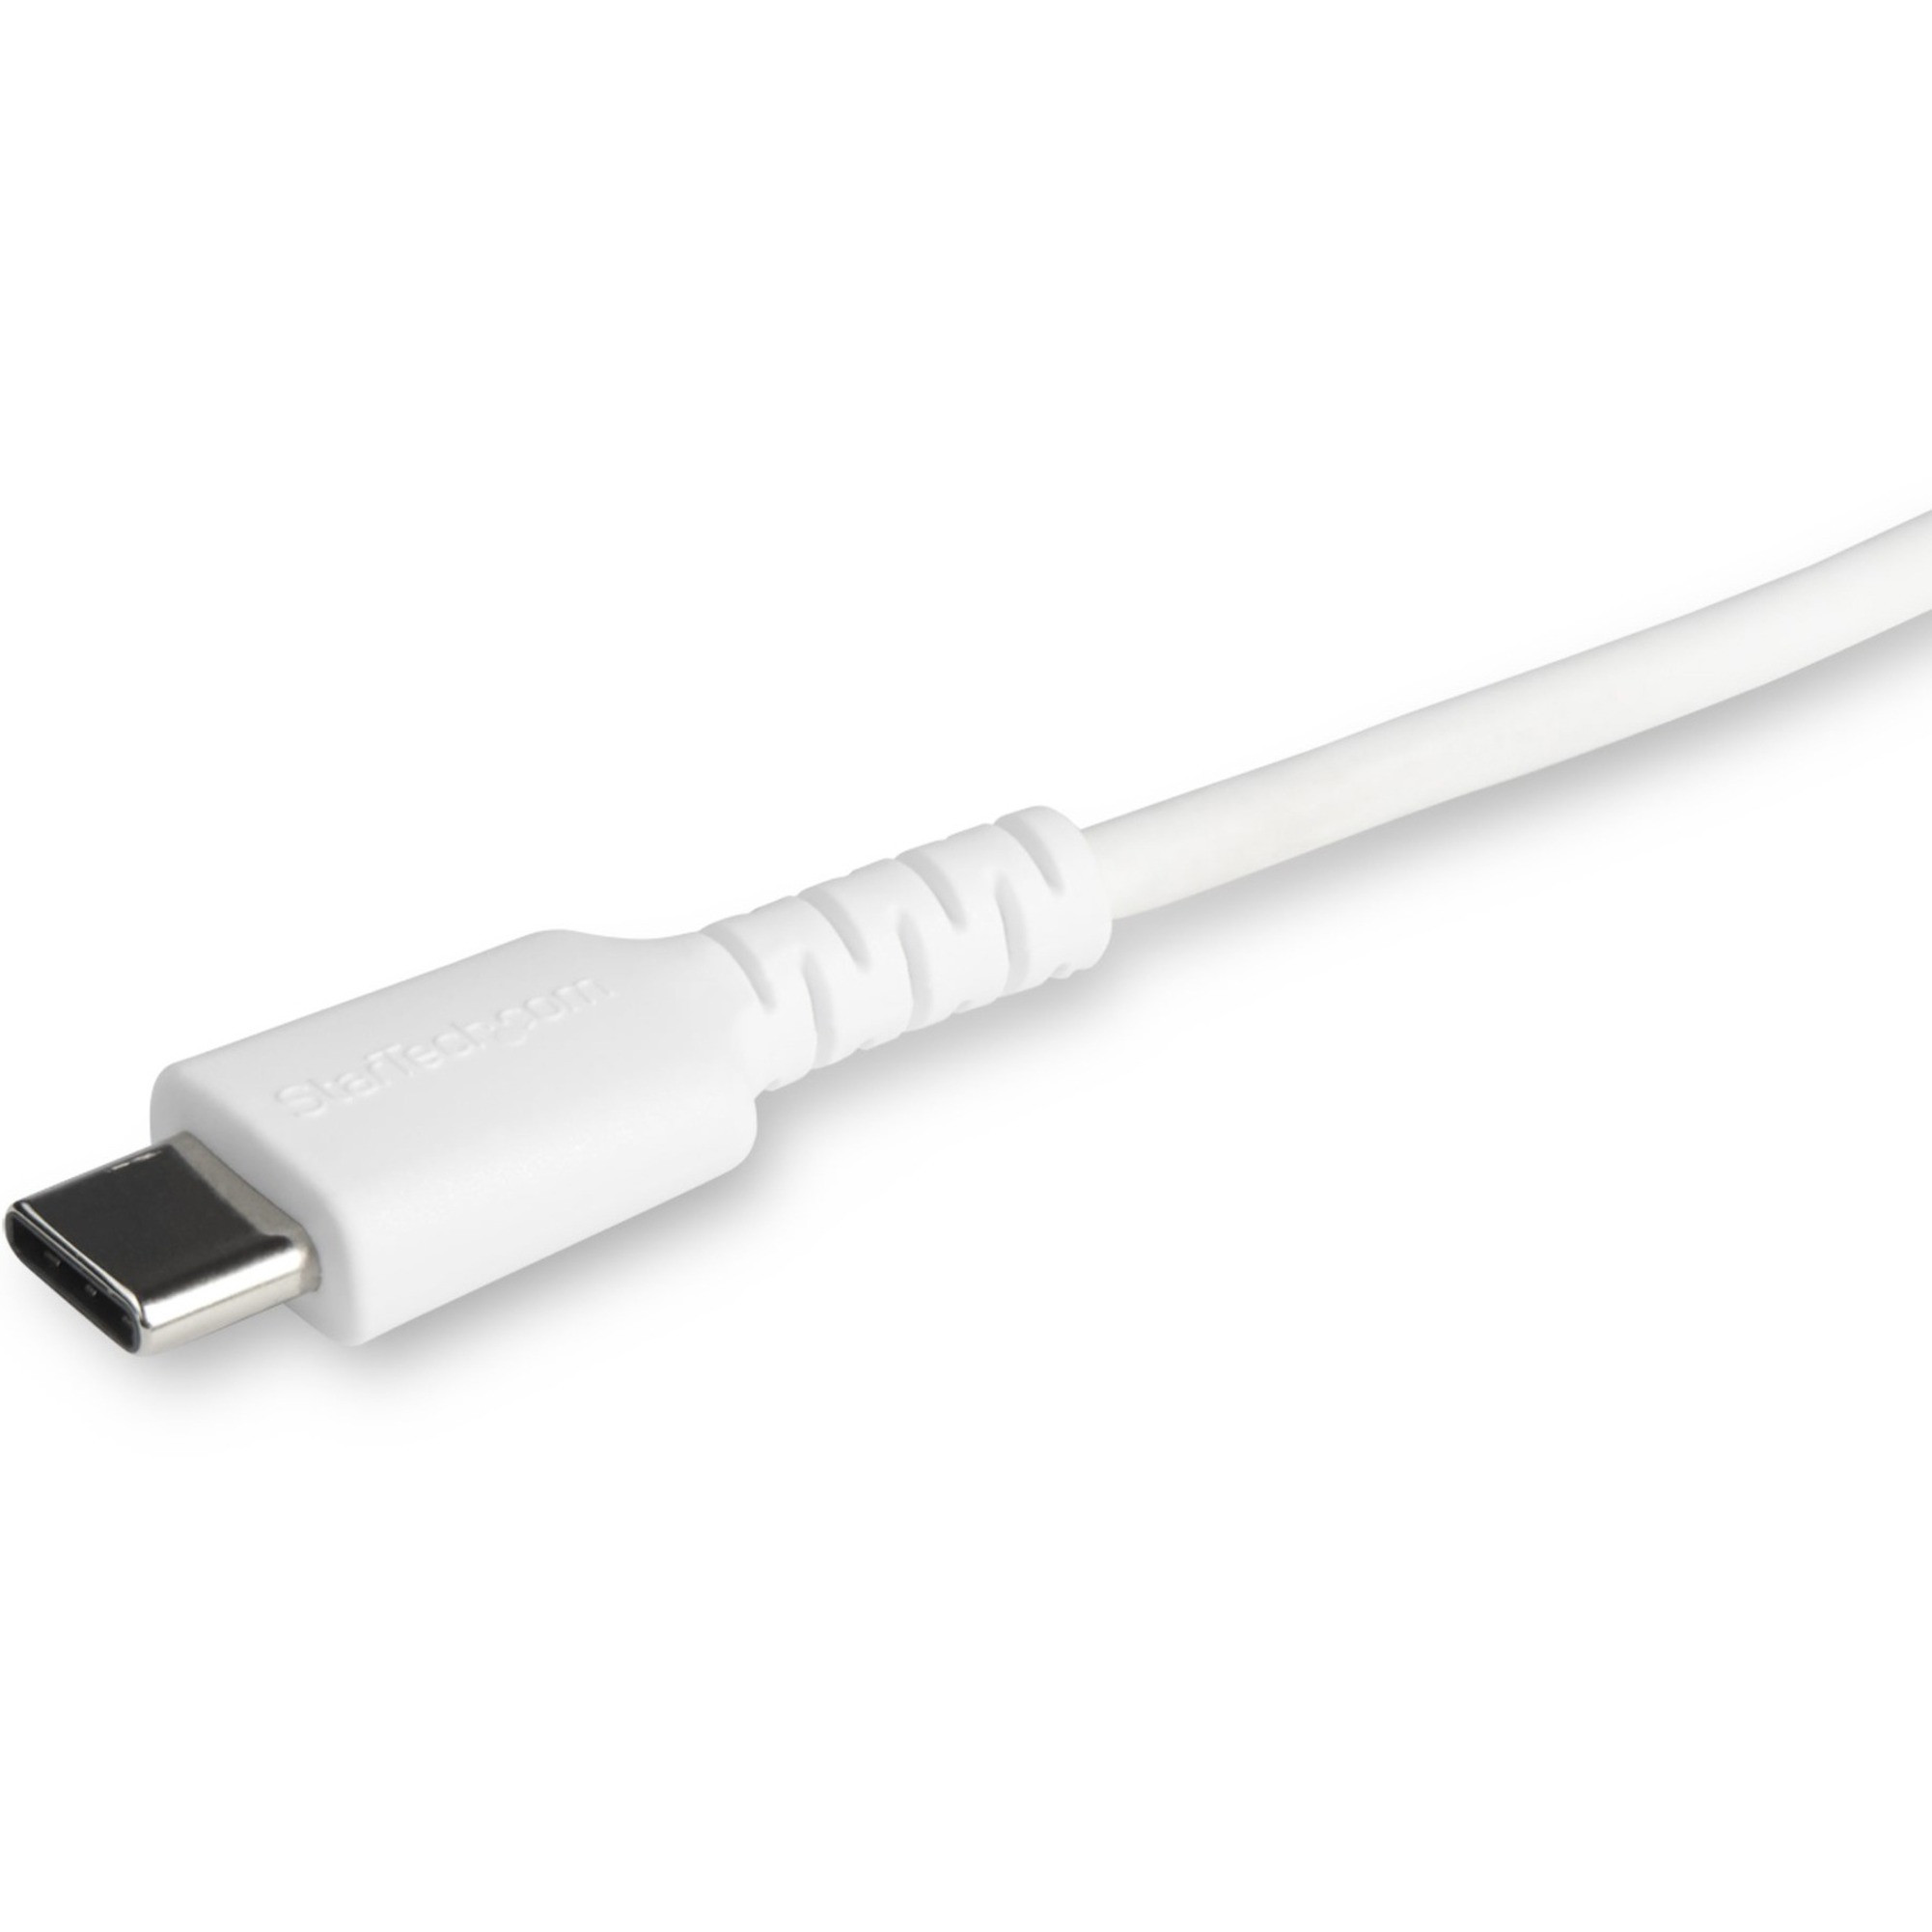 Apple 1m USB-C to Lightning Cable (White)